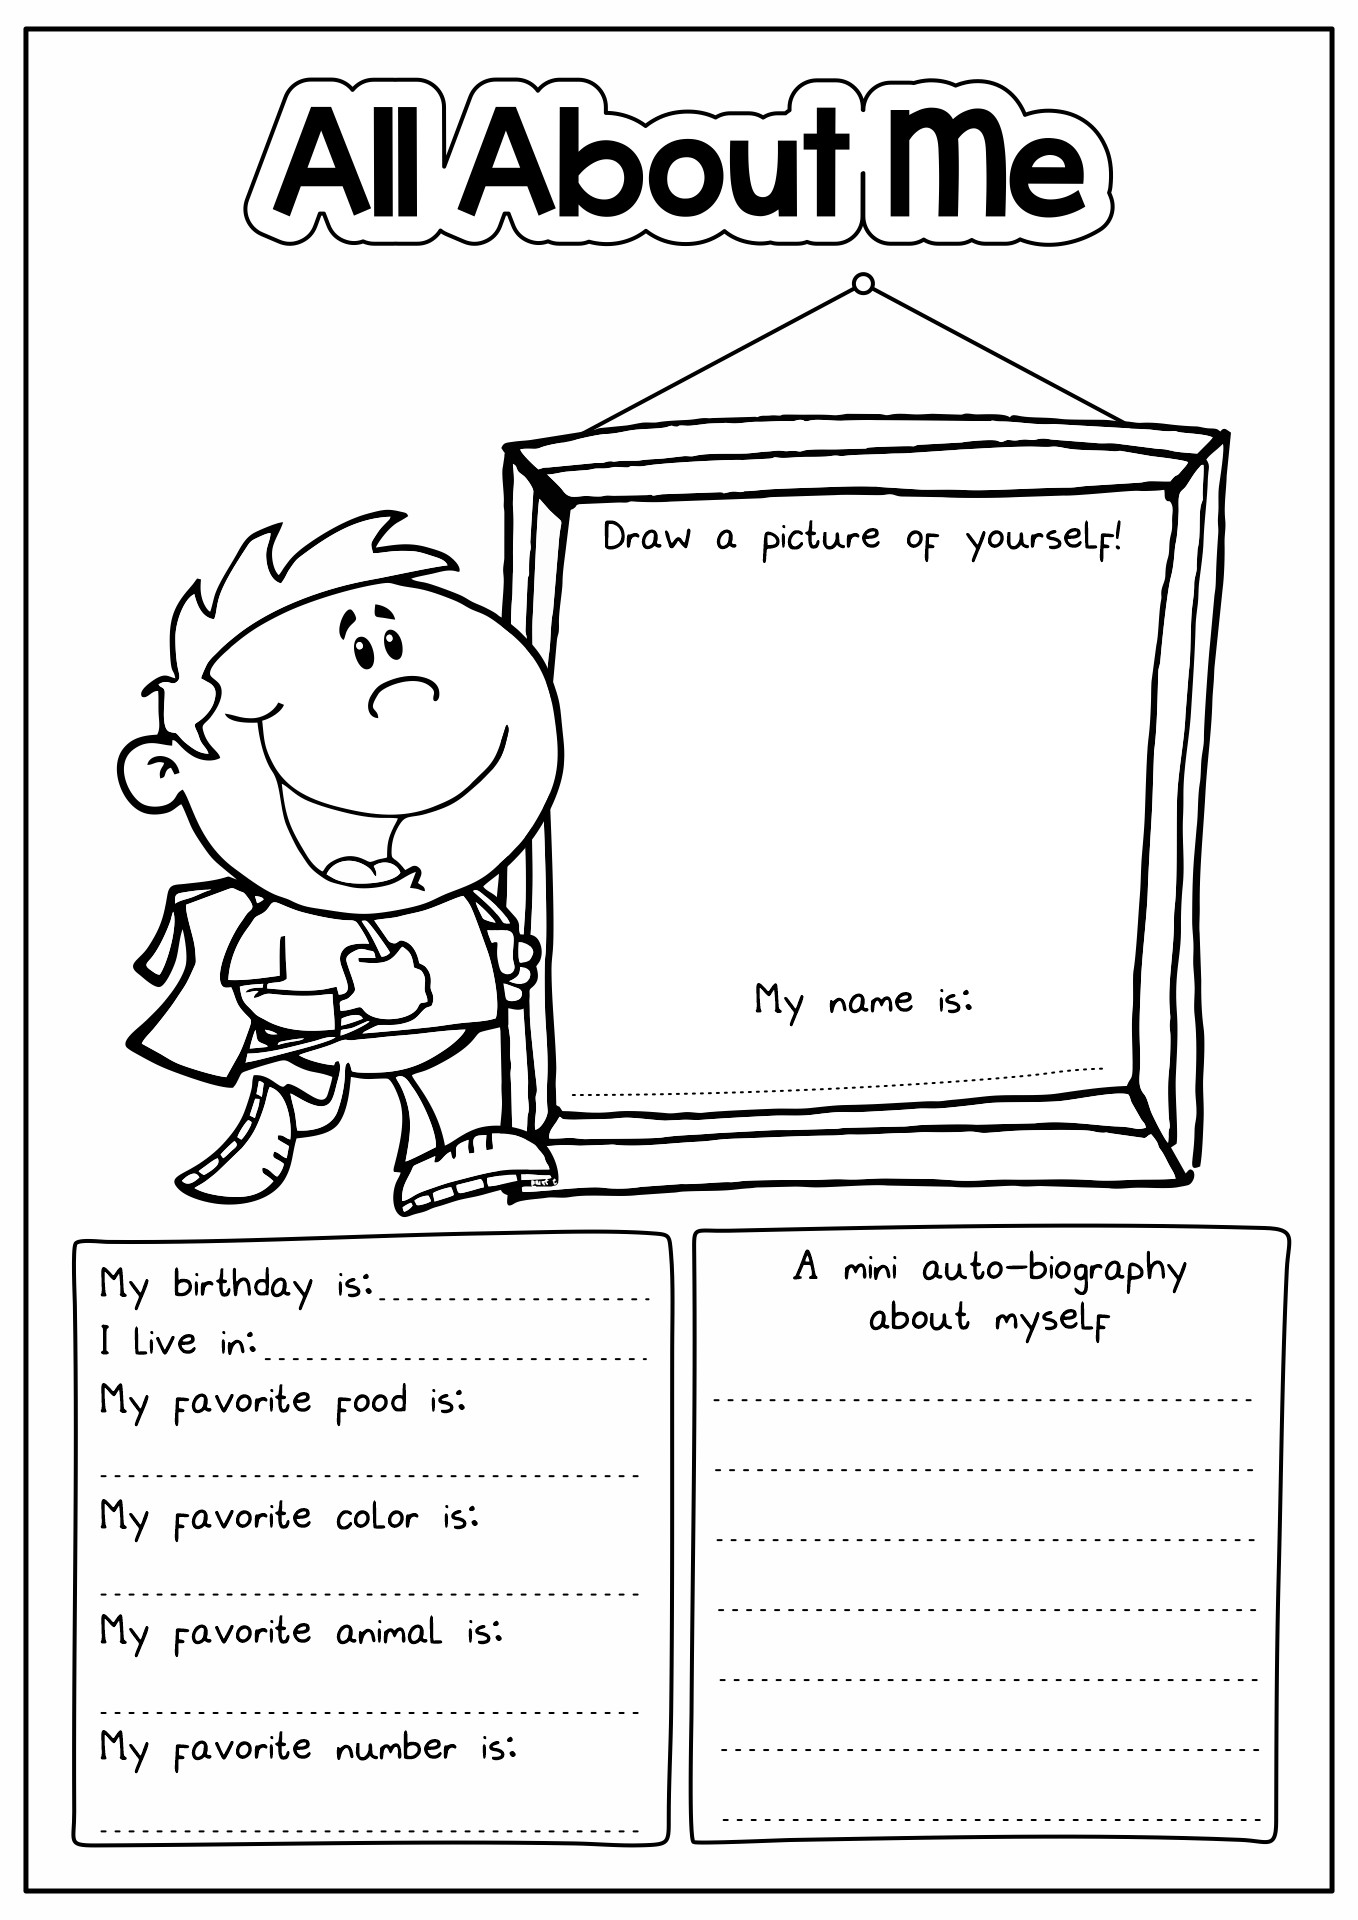 Free Printable All About Me Template For Adults